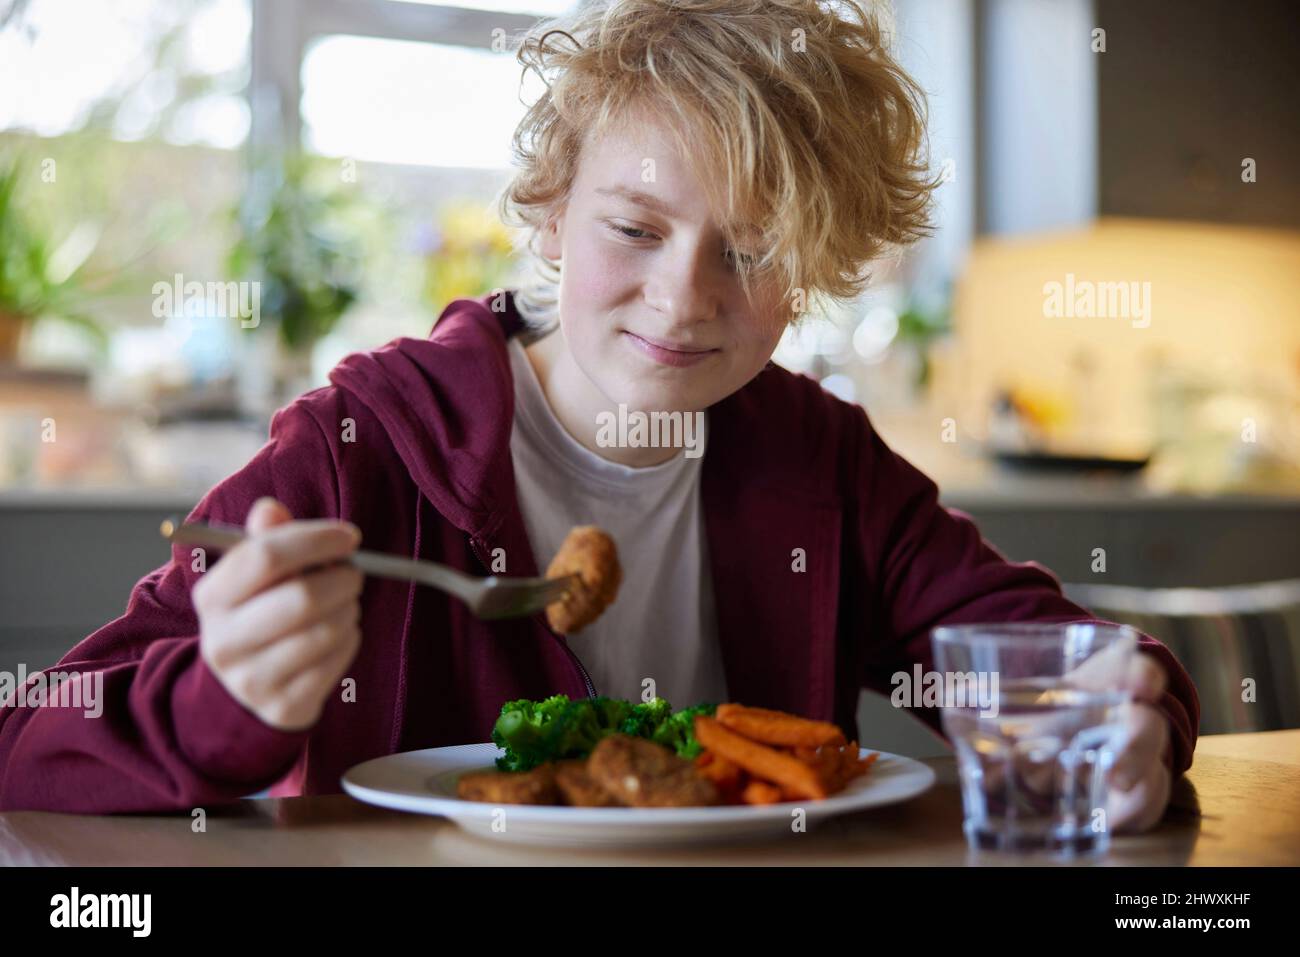 Teeange Girl Eating Vegan Meal Sitting At Table In Kitchen At Home Stock Photo